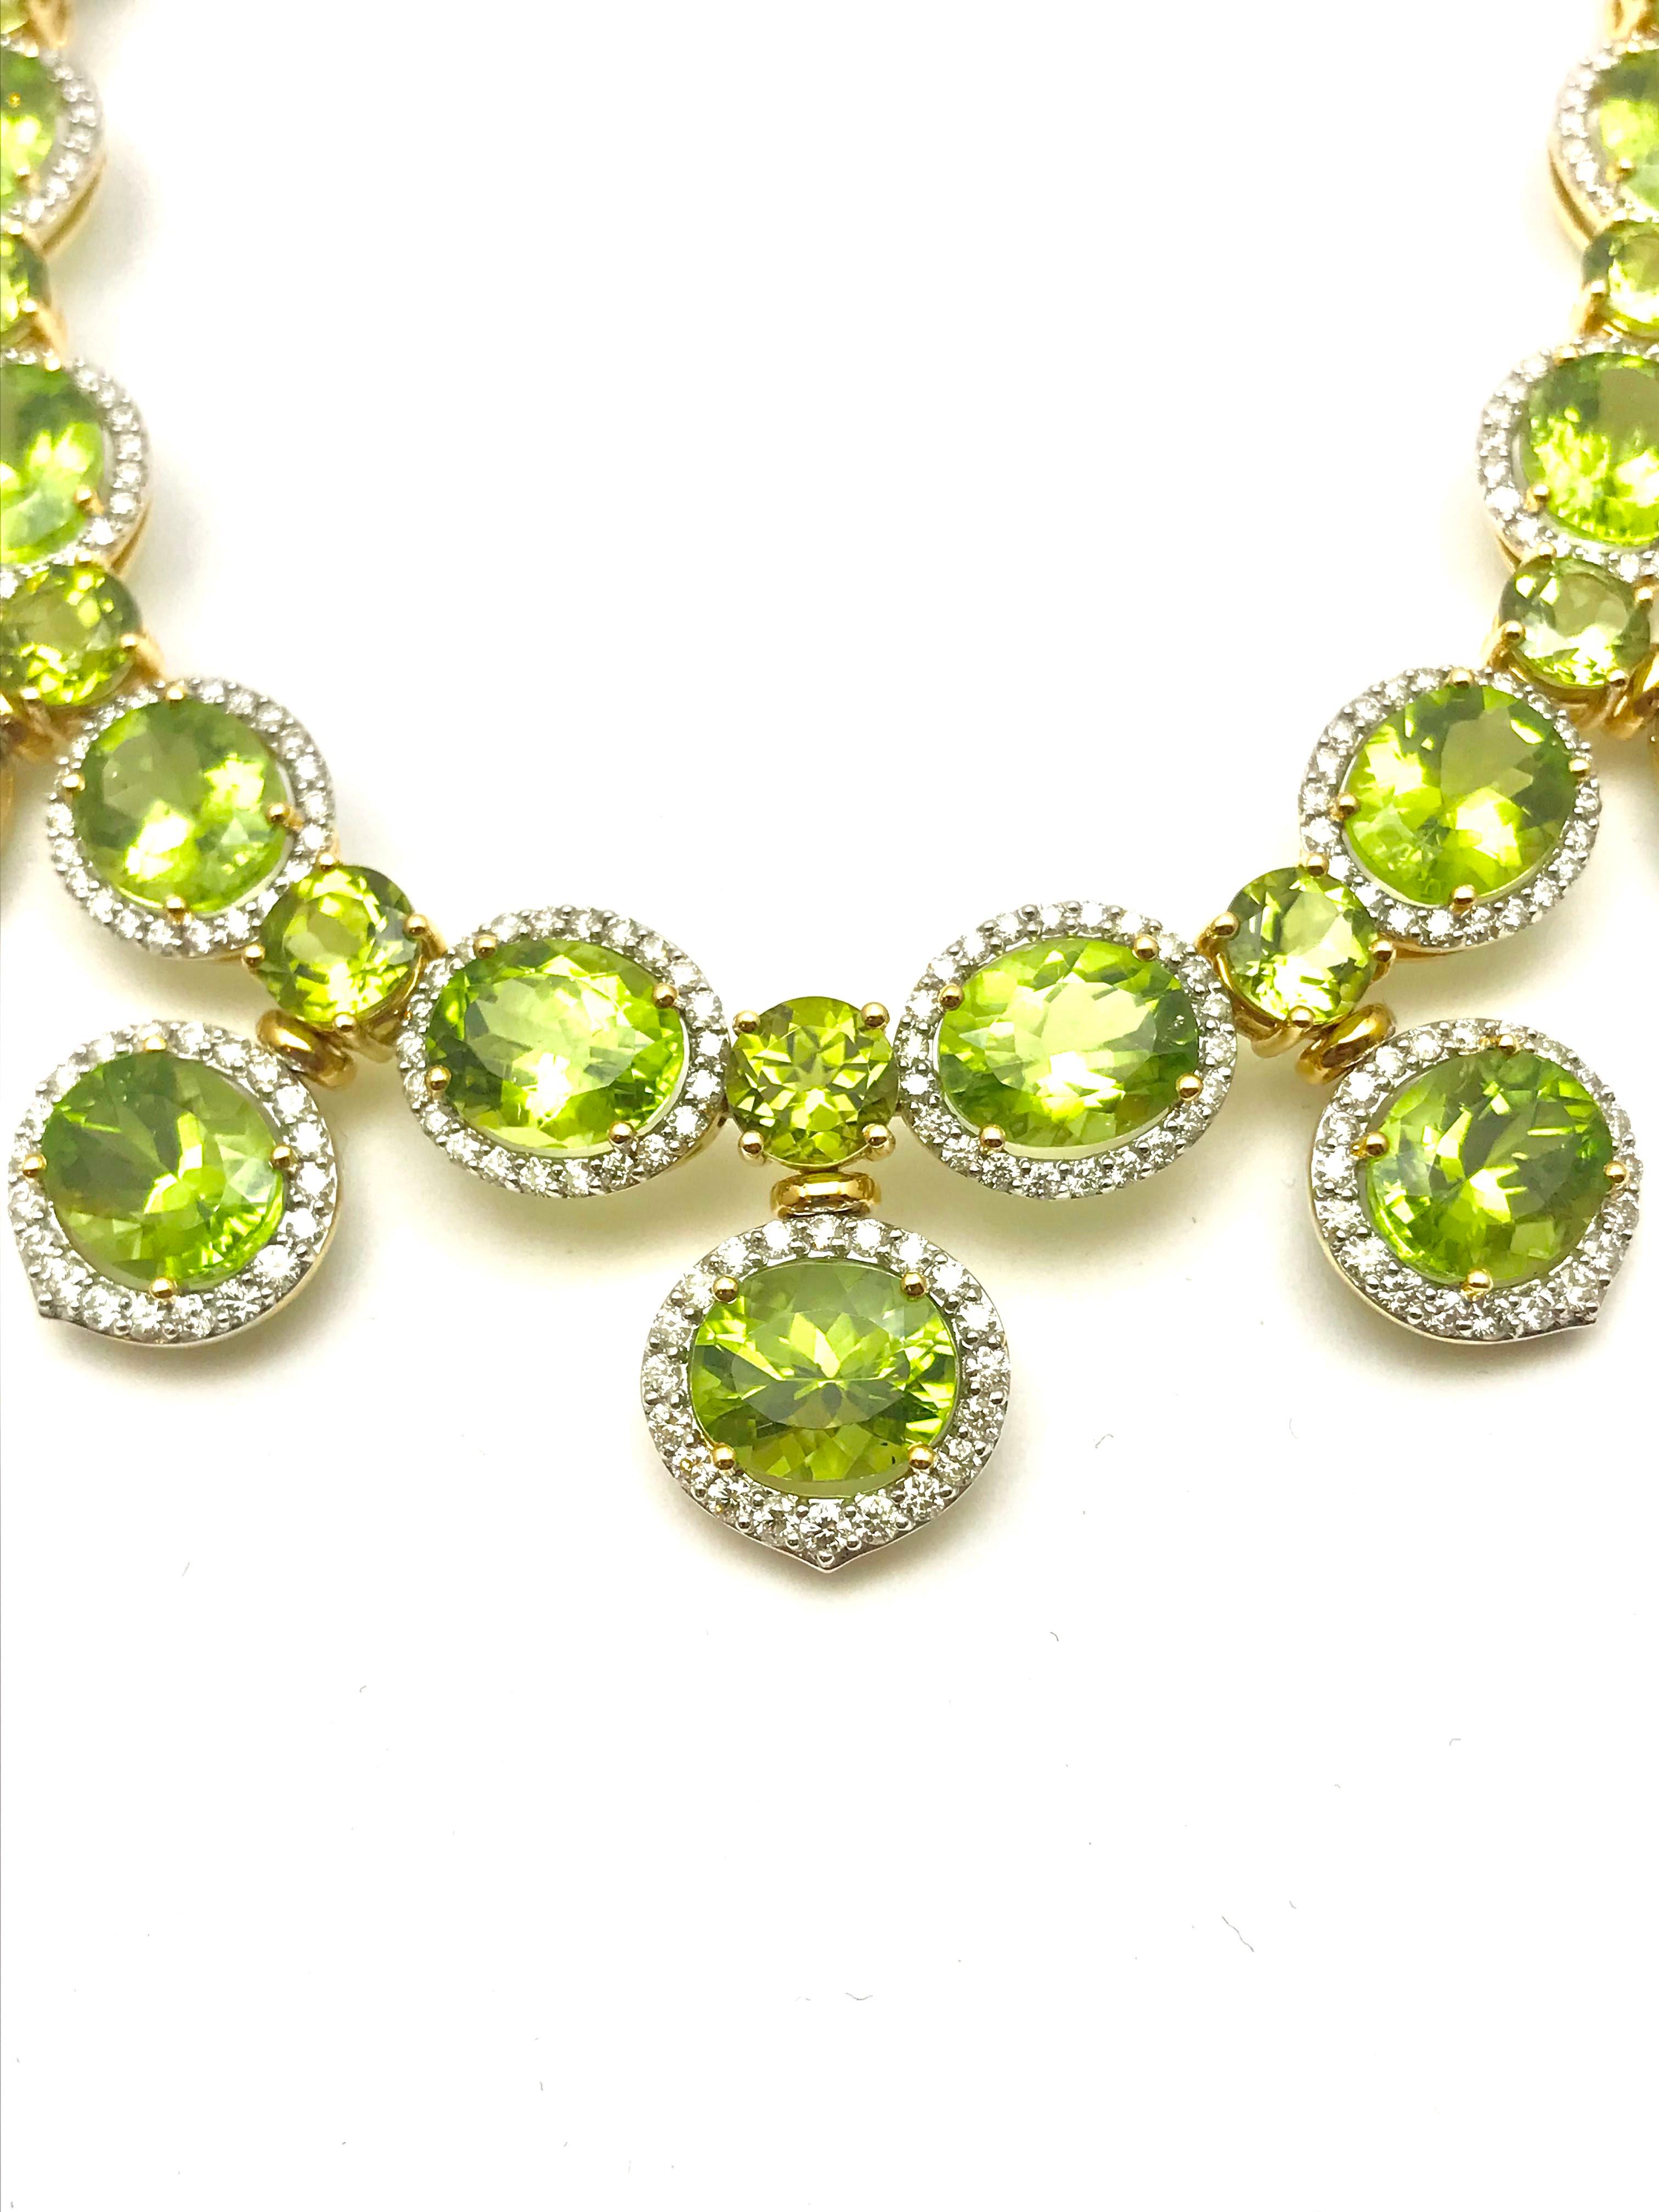 This stunning necklace contains 37 oval and round faceted Peridot totaling 117.19 carats, accompanied by 5.00 carats of round brilliant Diamonds.  The necklace is designed with the Diamonds in a single row around each oval Peridot on the front half